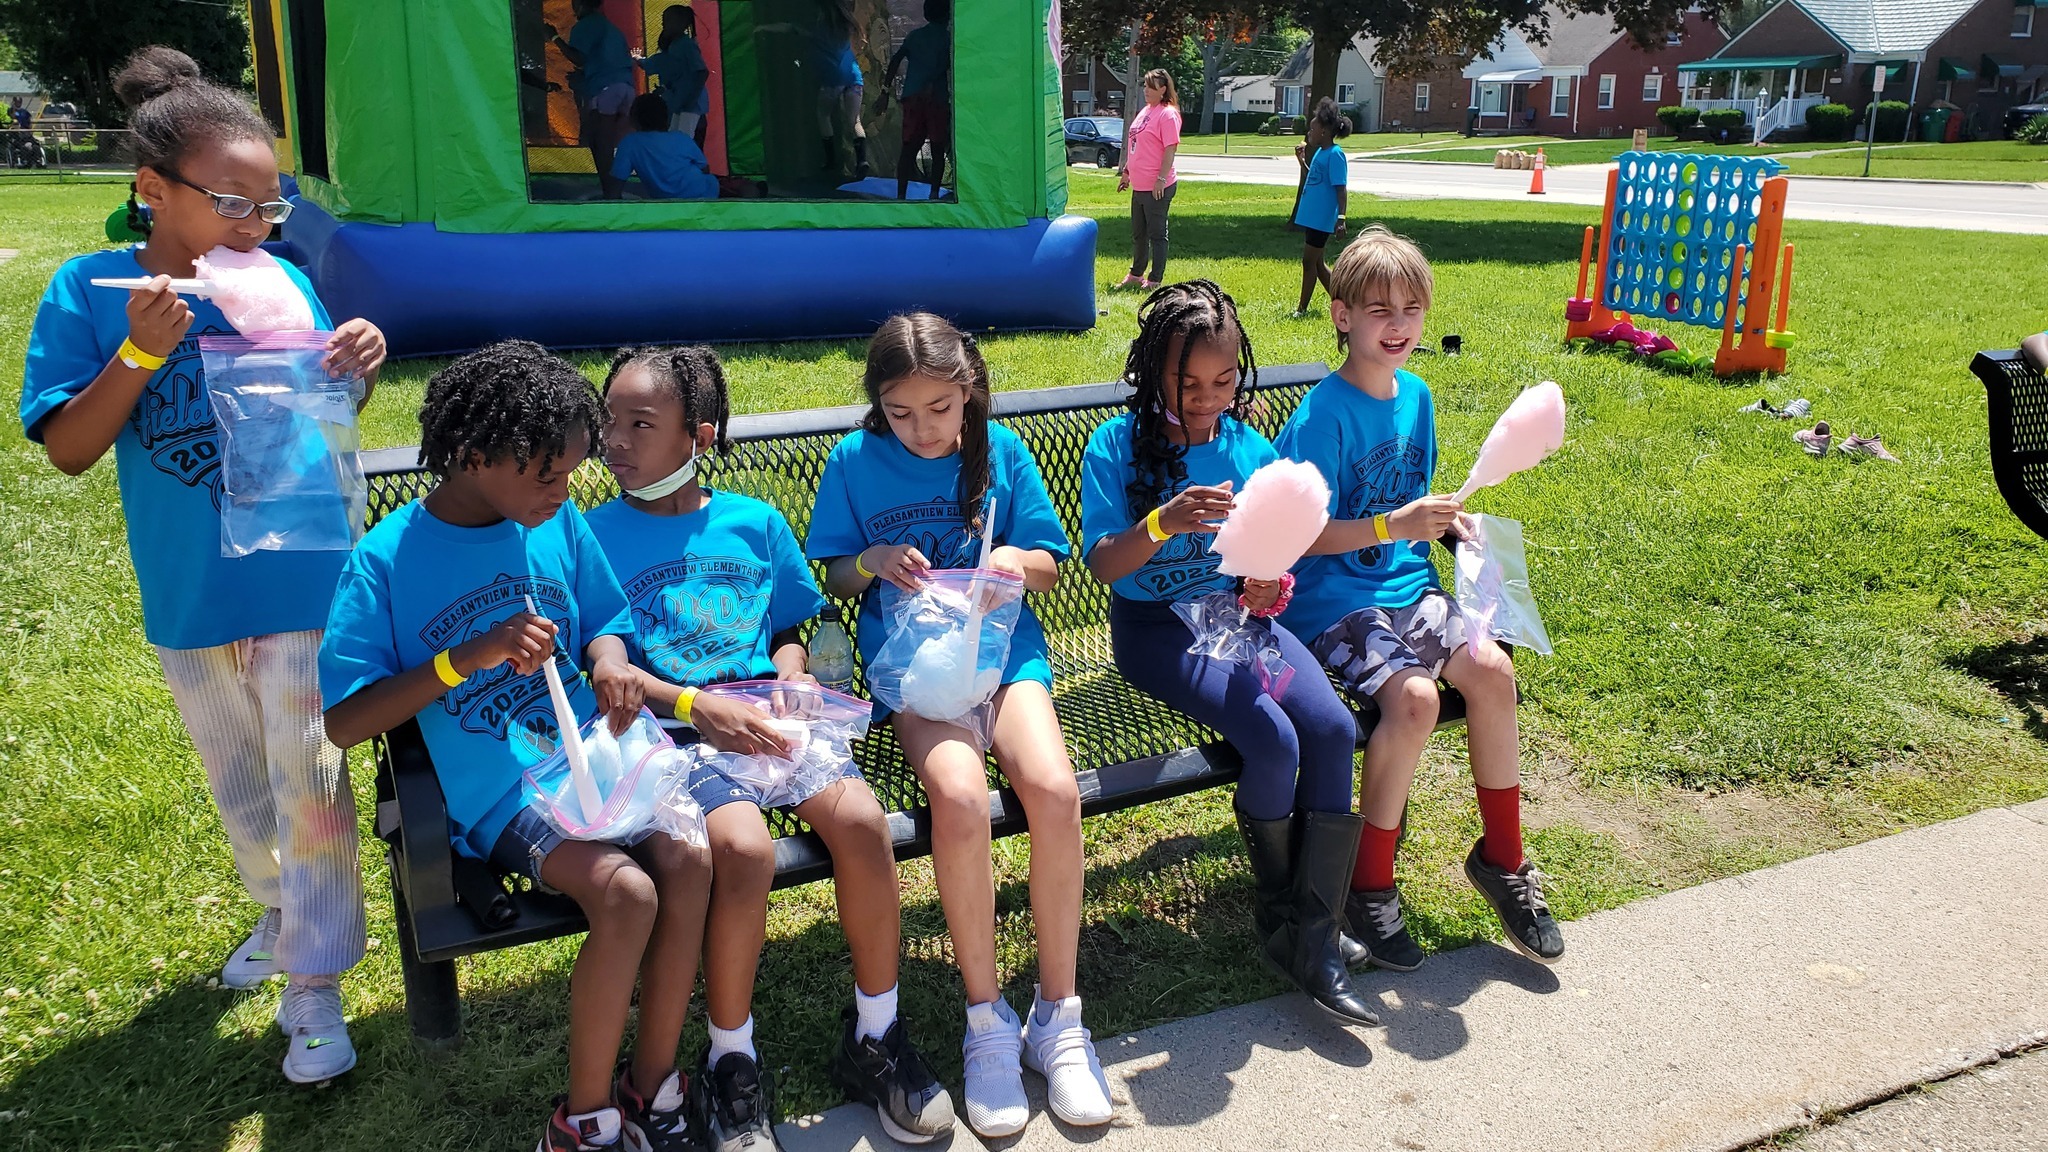 Pleasantview students sit on a bench and eat cotton candy